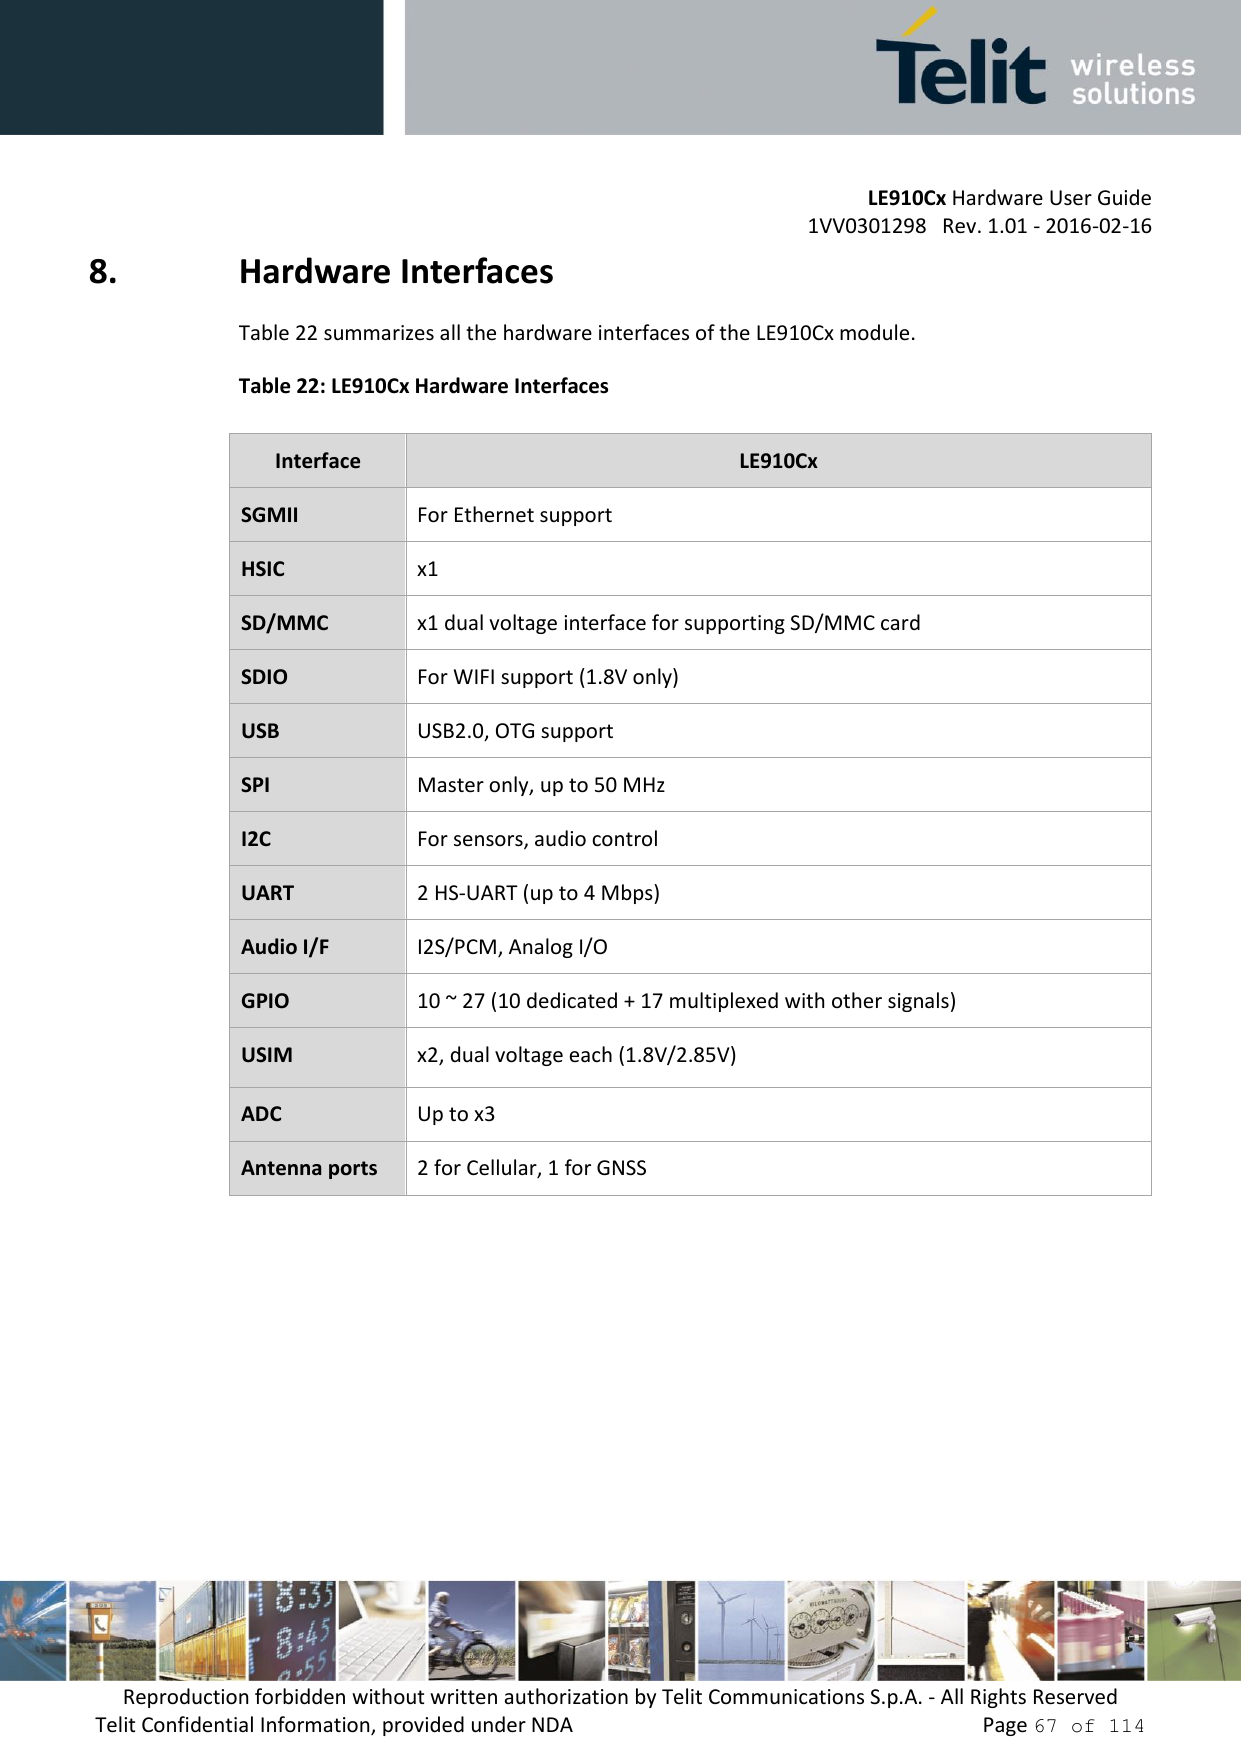         LE910Cx Hardware User Guide     1VV0301298   Rev. 1.01 - 2016-02-16 Reproduction forbidden without written authorization by Telit Communications S.p.A. - All Rights Reserved Telit Confidential Information, provided under NDA                 Page 67 of 114 8. Hardware Interfaces Table 22 summarizes all the hardware interfaces of the LE910Cx module. Table 22: LE910Cx Hardware Interfaces    Interface LE910Cx SGMII For Ethernet support  HSIC x1 SD/MMC x1 dual voltage interface for supporting SD/MMC card SDIO For WIFI support (1.8V only) USB USB2.0, OTG support SPI Master only, up to 50 MHz  I2C For sensors, audio control UART 2 HS-UART (up to 4 Mbps) Audio I/F I2S/PCM, Analog I/O GPIO 10 ~ 27 (10 dedicated + 17 multiplexed with other signals) USIM x2, dual voltage each (1.8V/2.85V) ADC Up to x3 Antenna ports 2 for Cellular, 1 for GNSS 